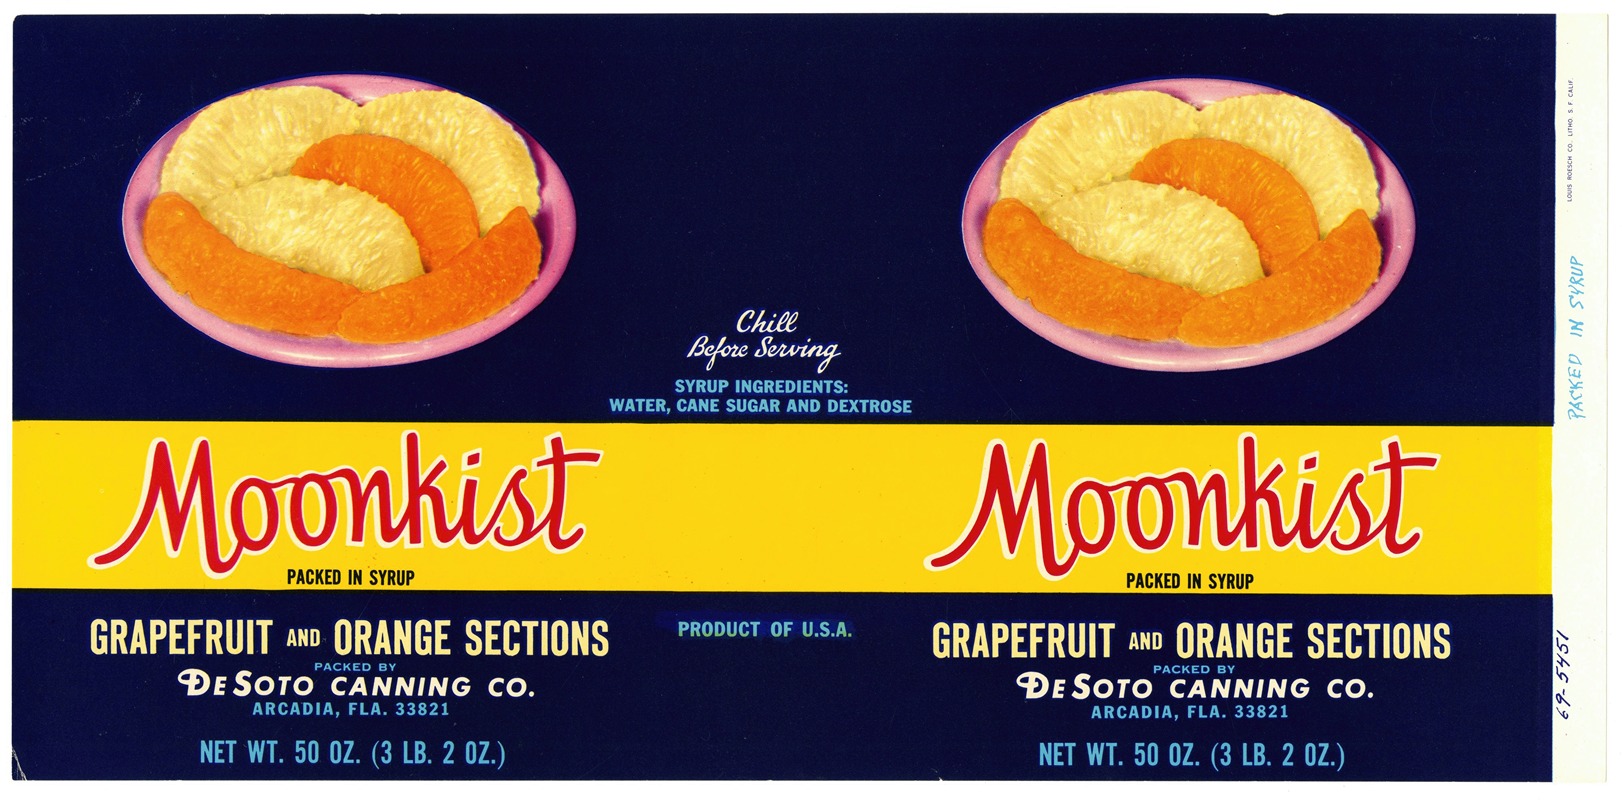 Anonymous - Label for Moonkist Grapefruit and Orange Sections